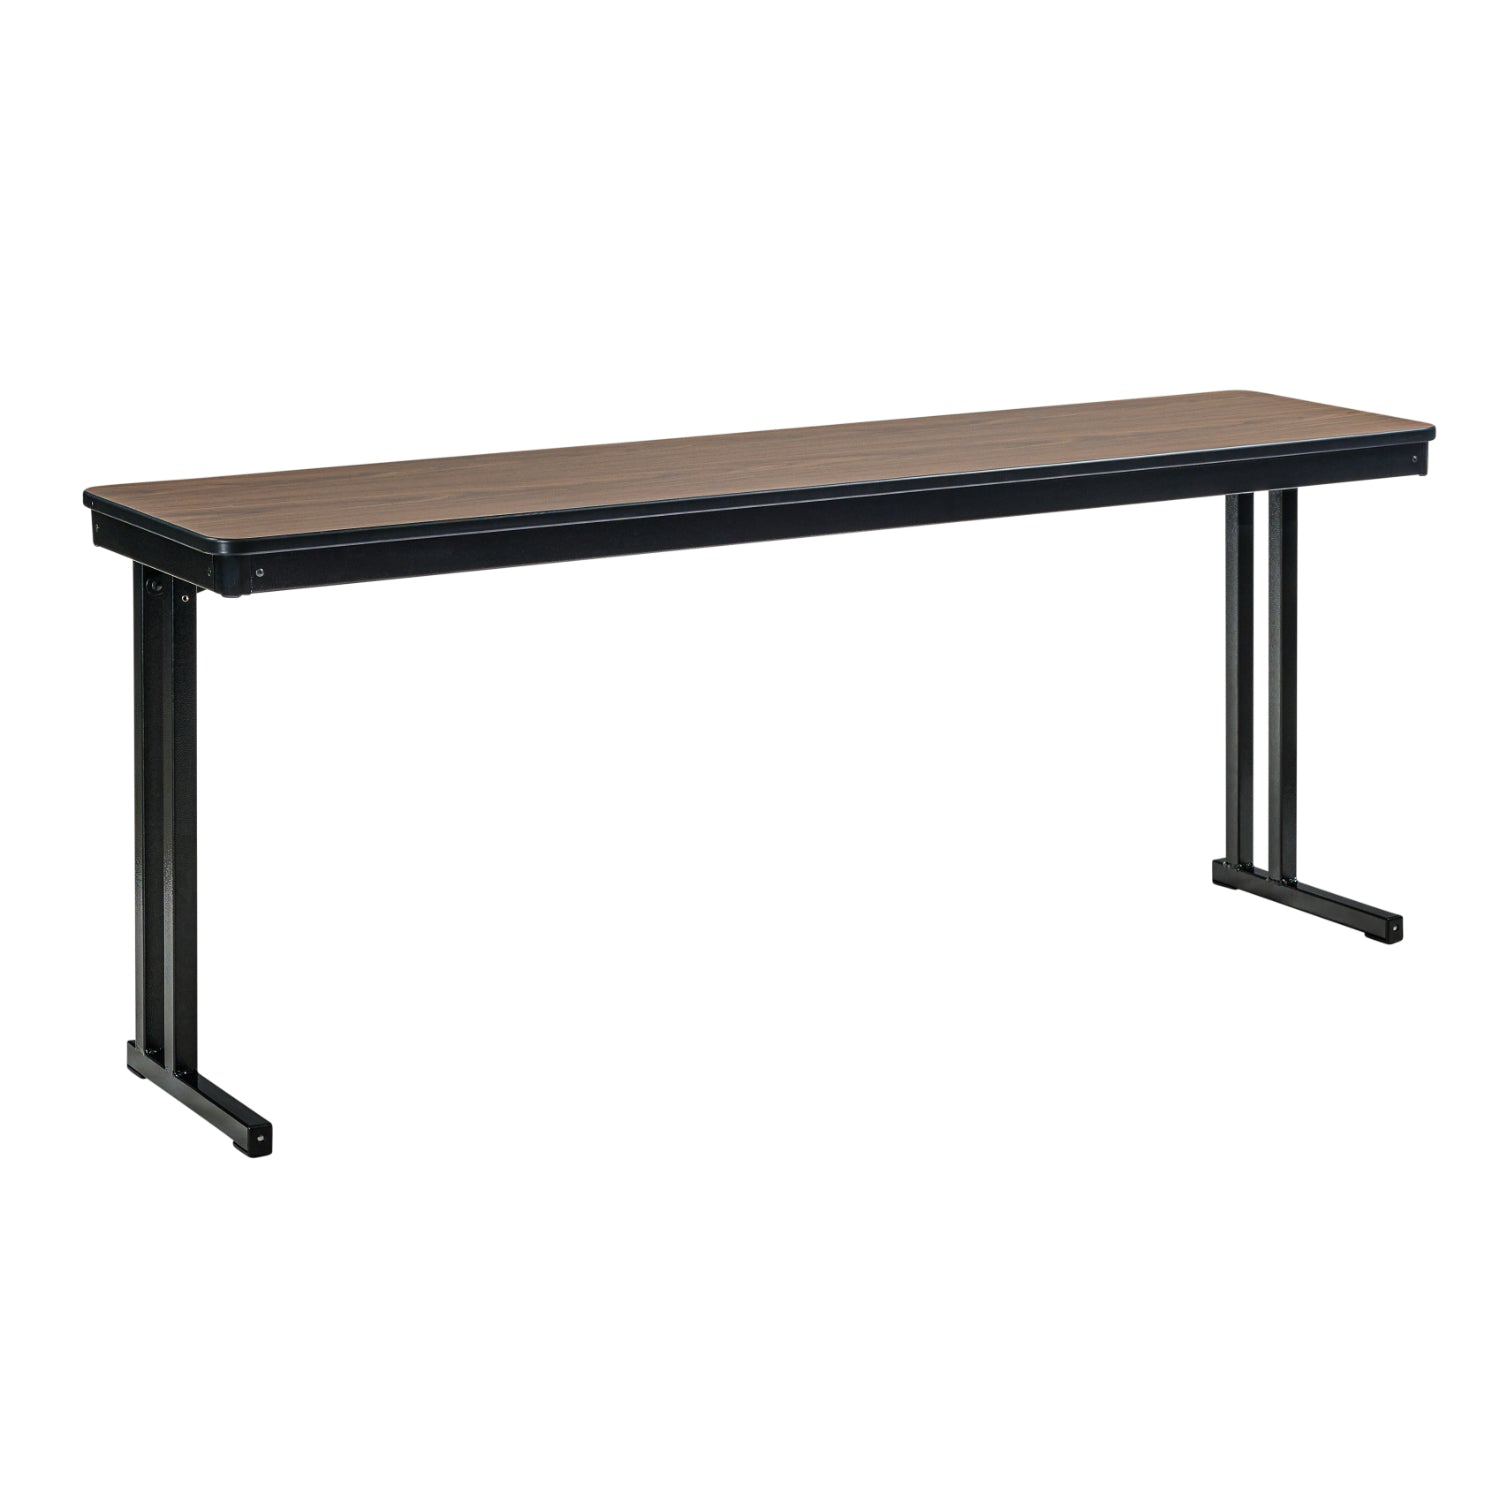 Max Seating Folding Training and Seminar Table with Cantilever Legs, 18" x 60", High Pressure Laminate Top with MDF Core/ProtectEdge